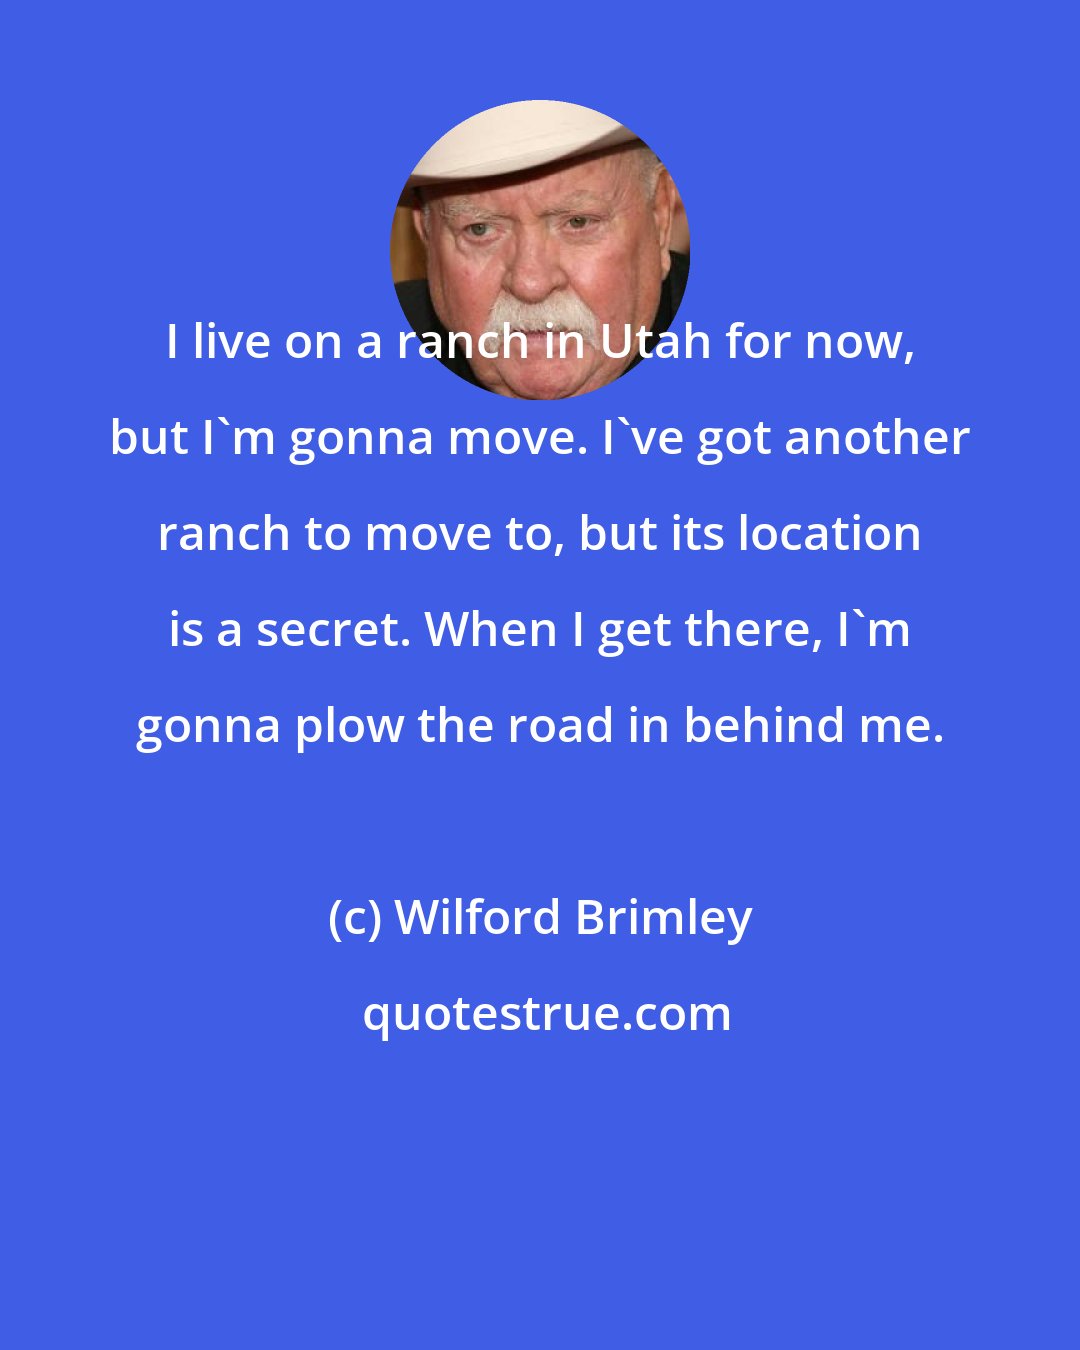 Wilford Brimley: I live on a ranch in Utah for now, but I'm gonna move. I've got another ranch to move to, but its location is a secret. When I get there, I'm gonna plow the road in behind me.